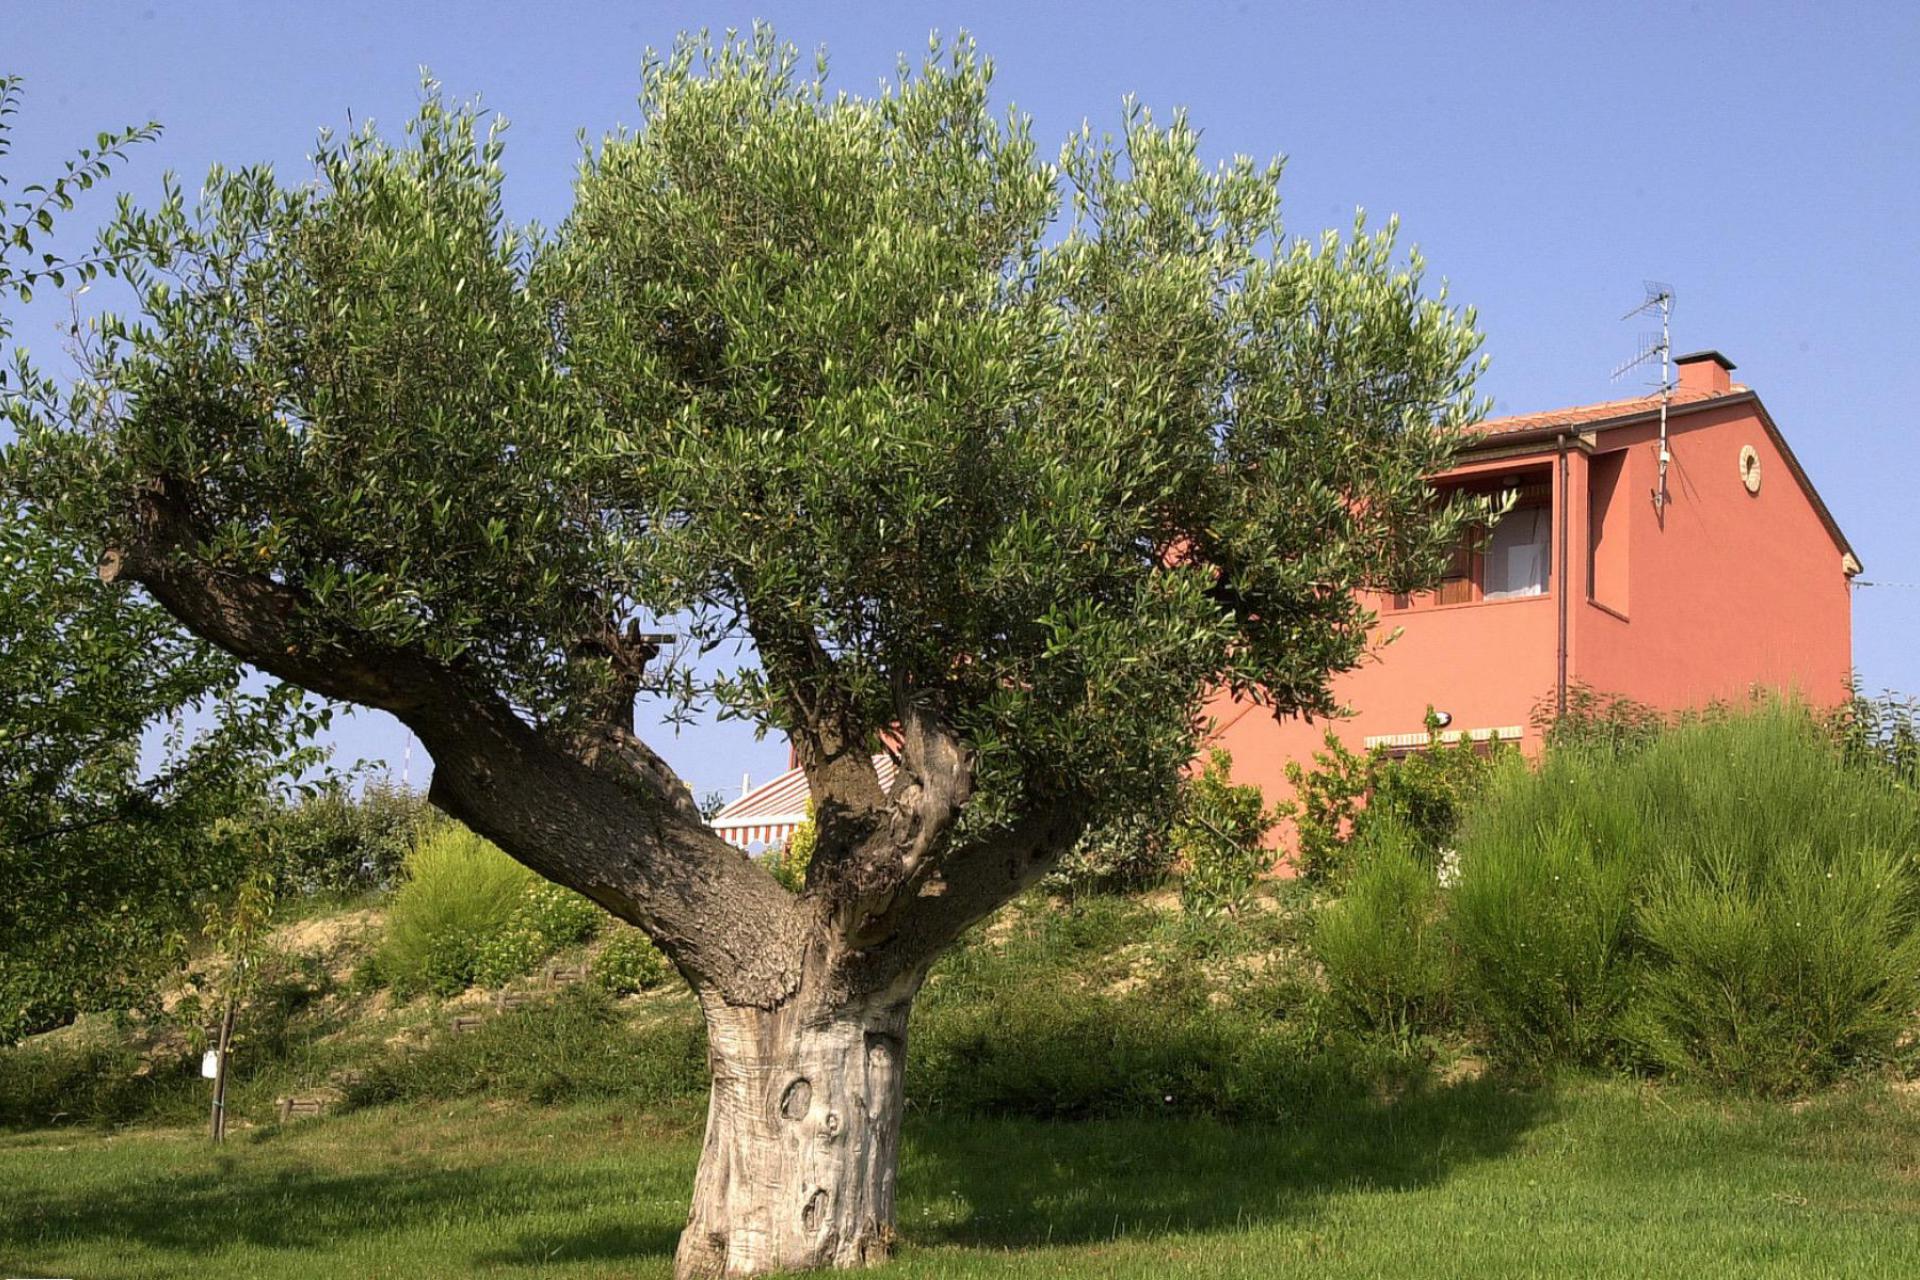 Agriturismo Marche Agriturismo Marche with restaurant in an olive grove